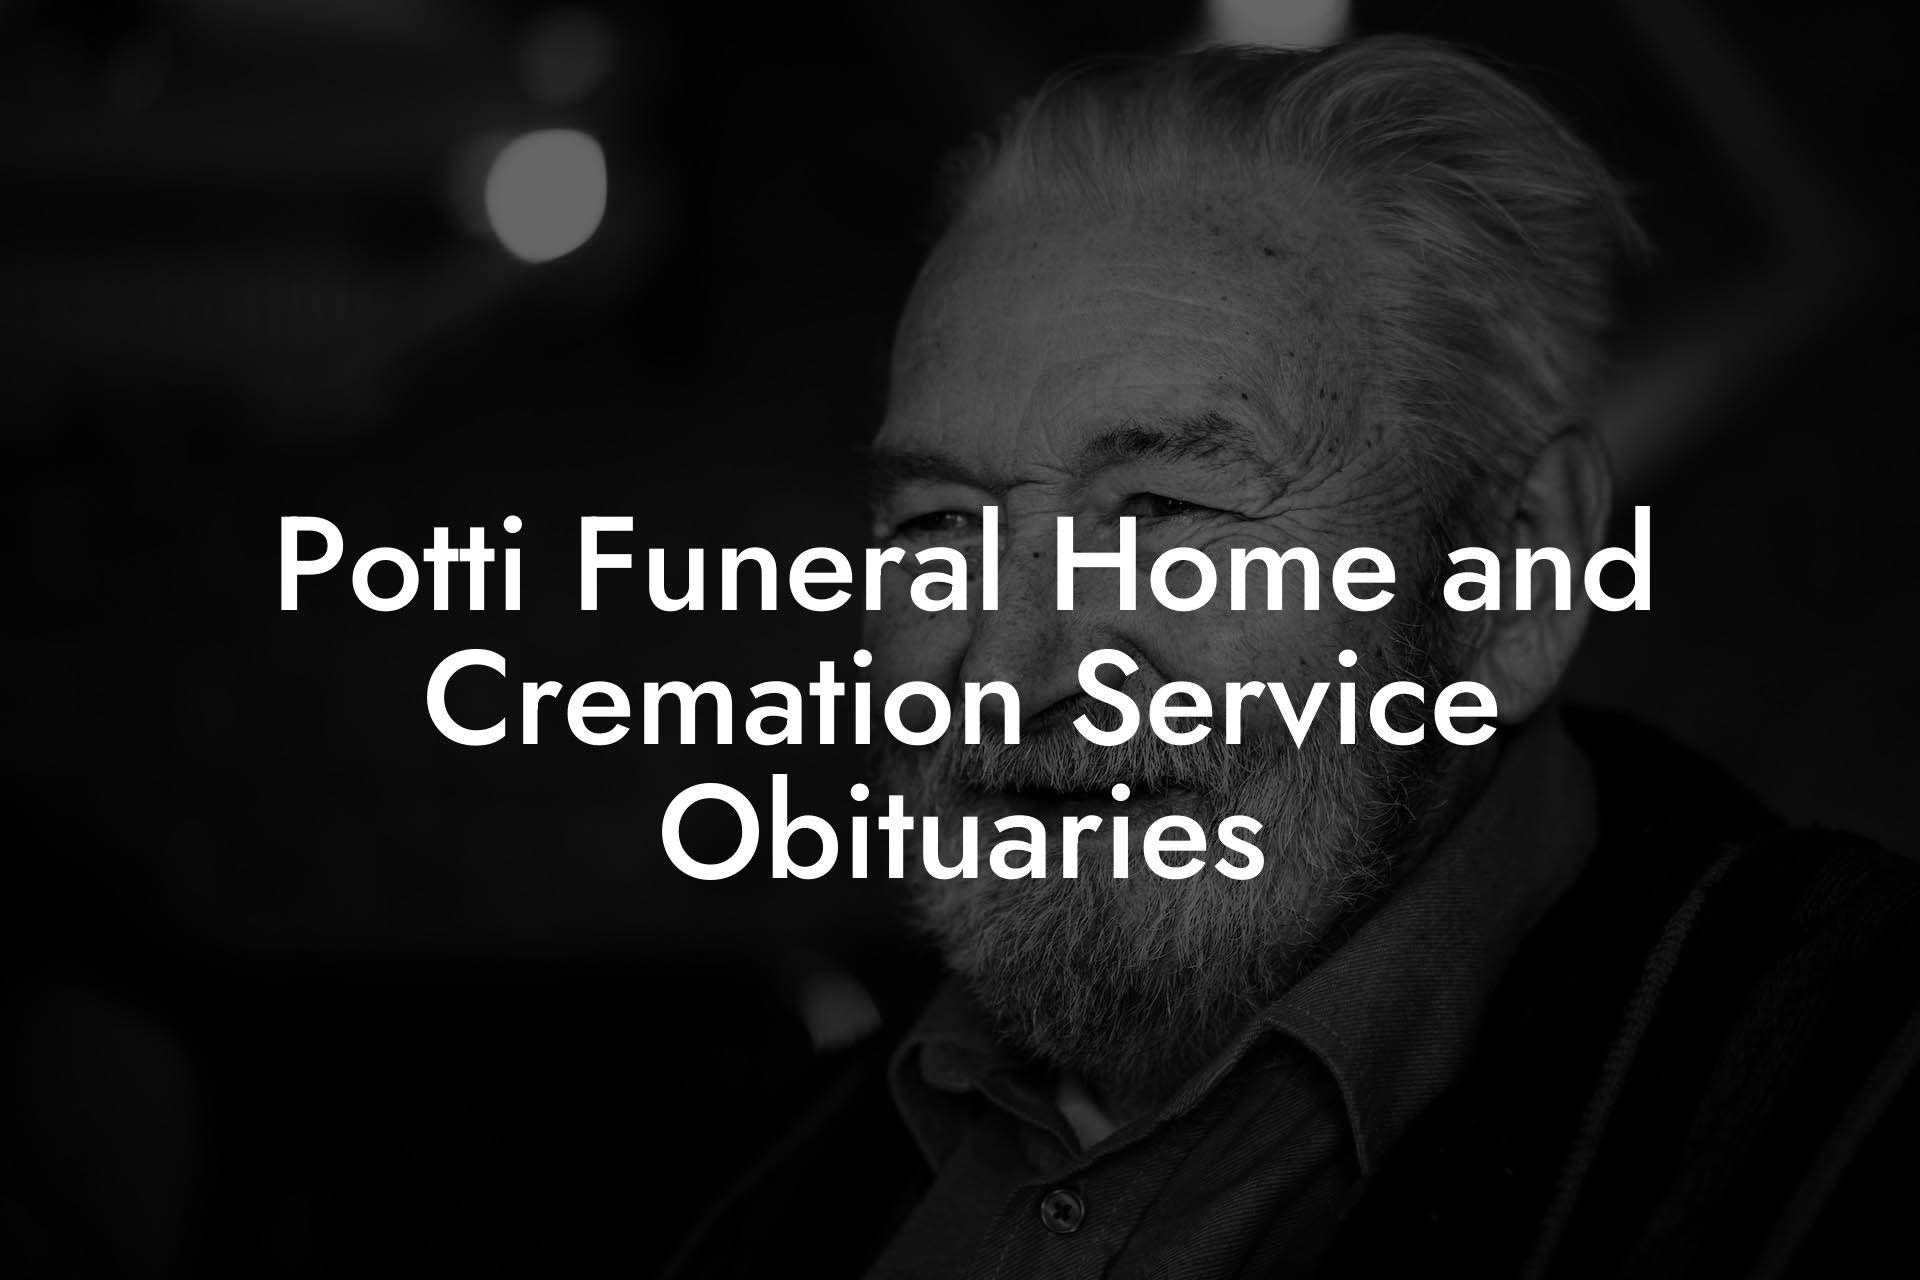 Potti Funeral Home and Cremation Service Obituaries